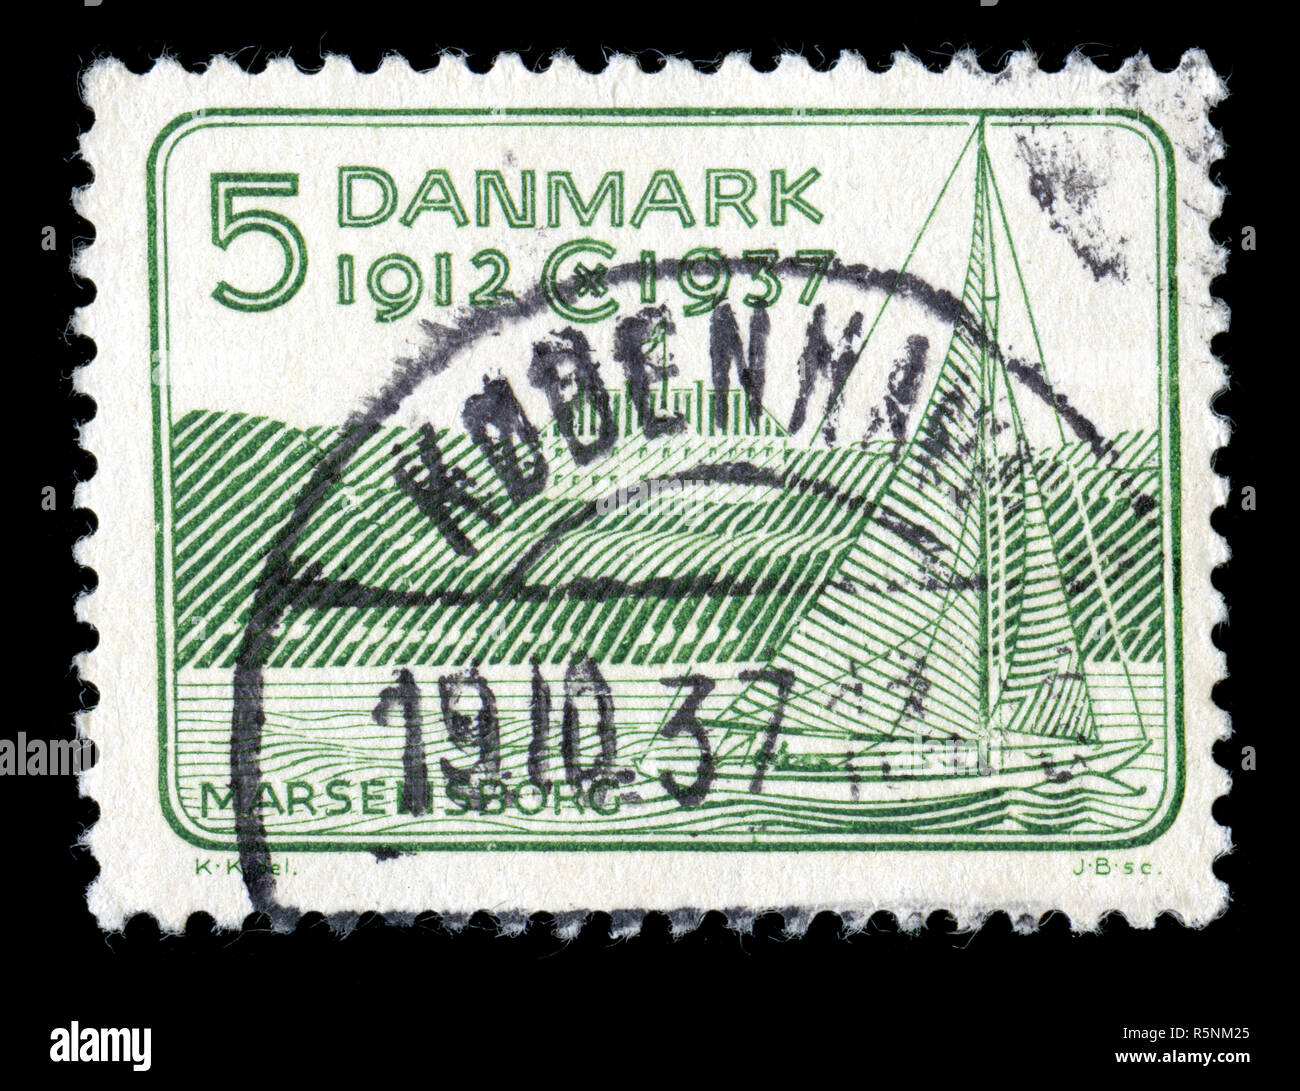 Postage stamp from Denmark in the King Christian X- Jubilee series issued in 1937 Stock Photo